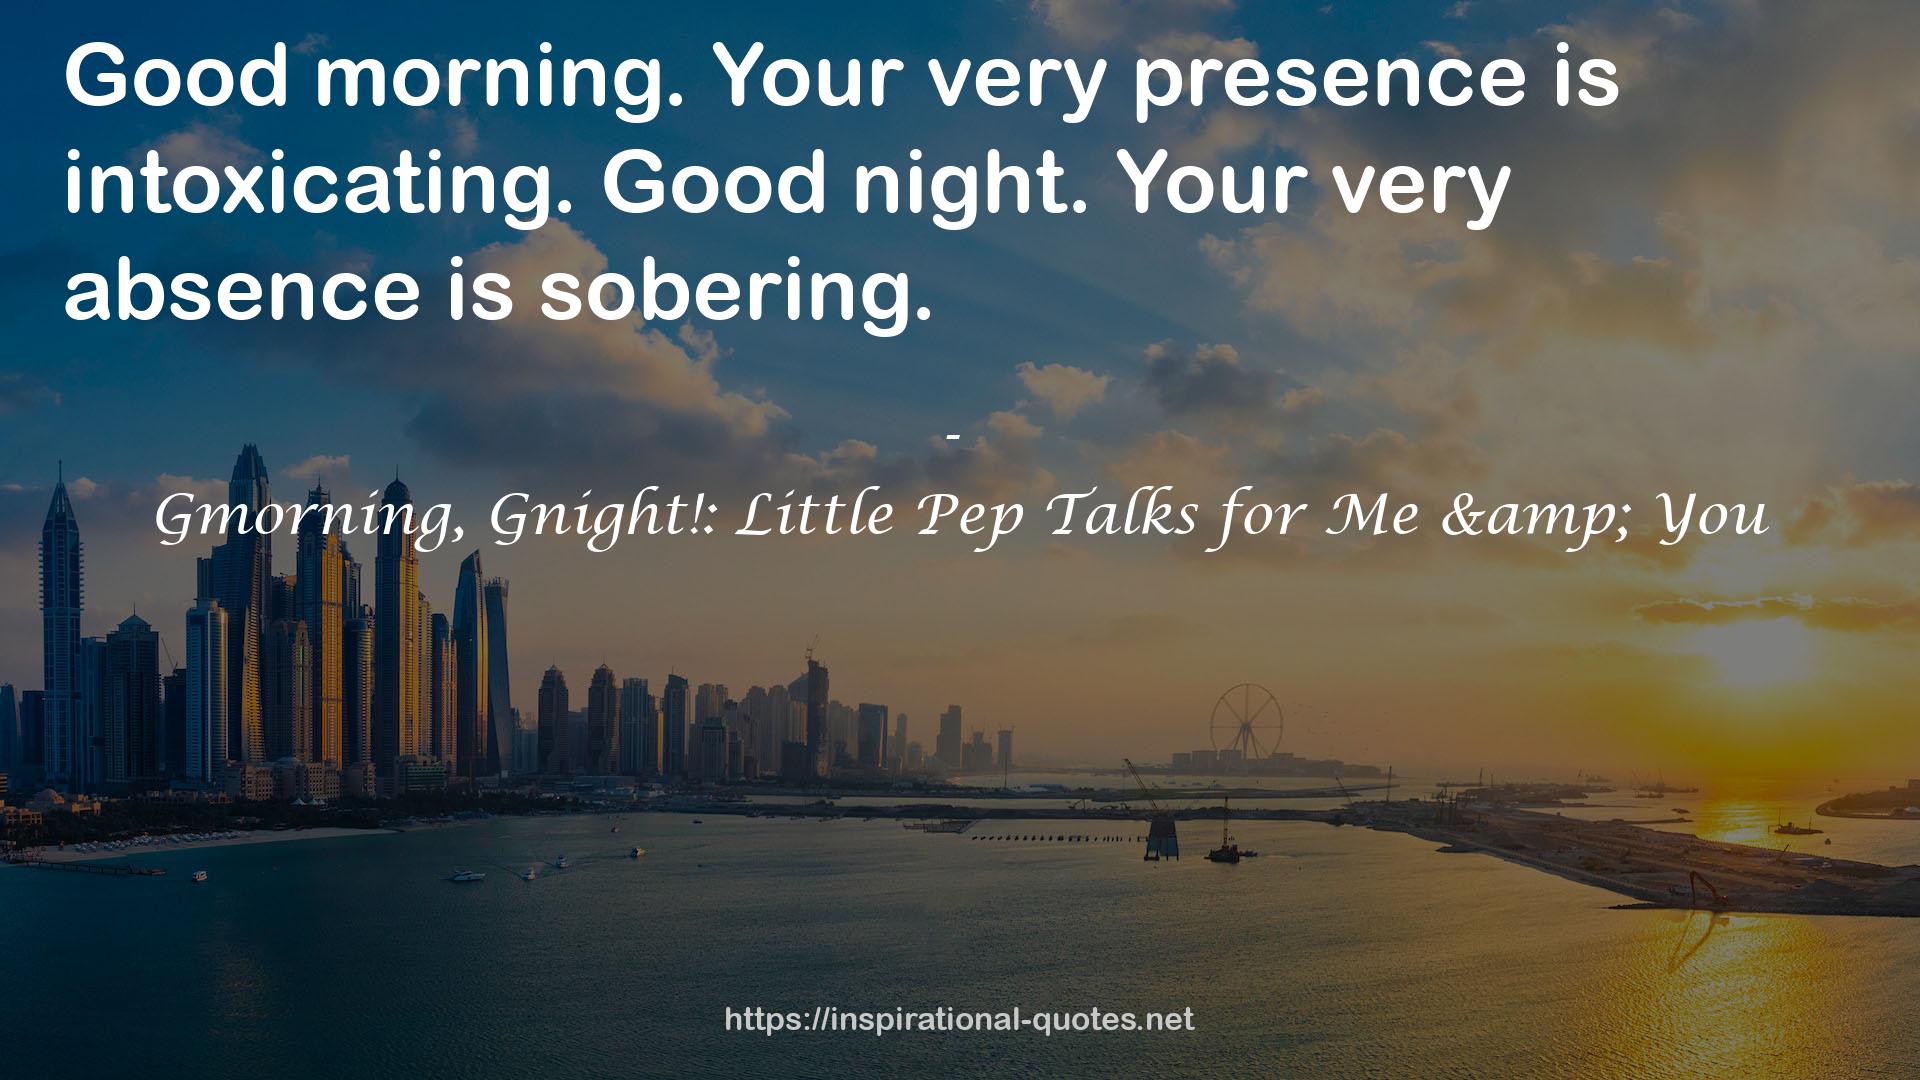 Gmorning, Gnight!: Little Pep Talks for Me & You QUOTES